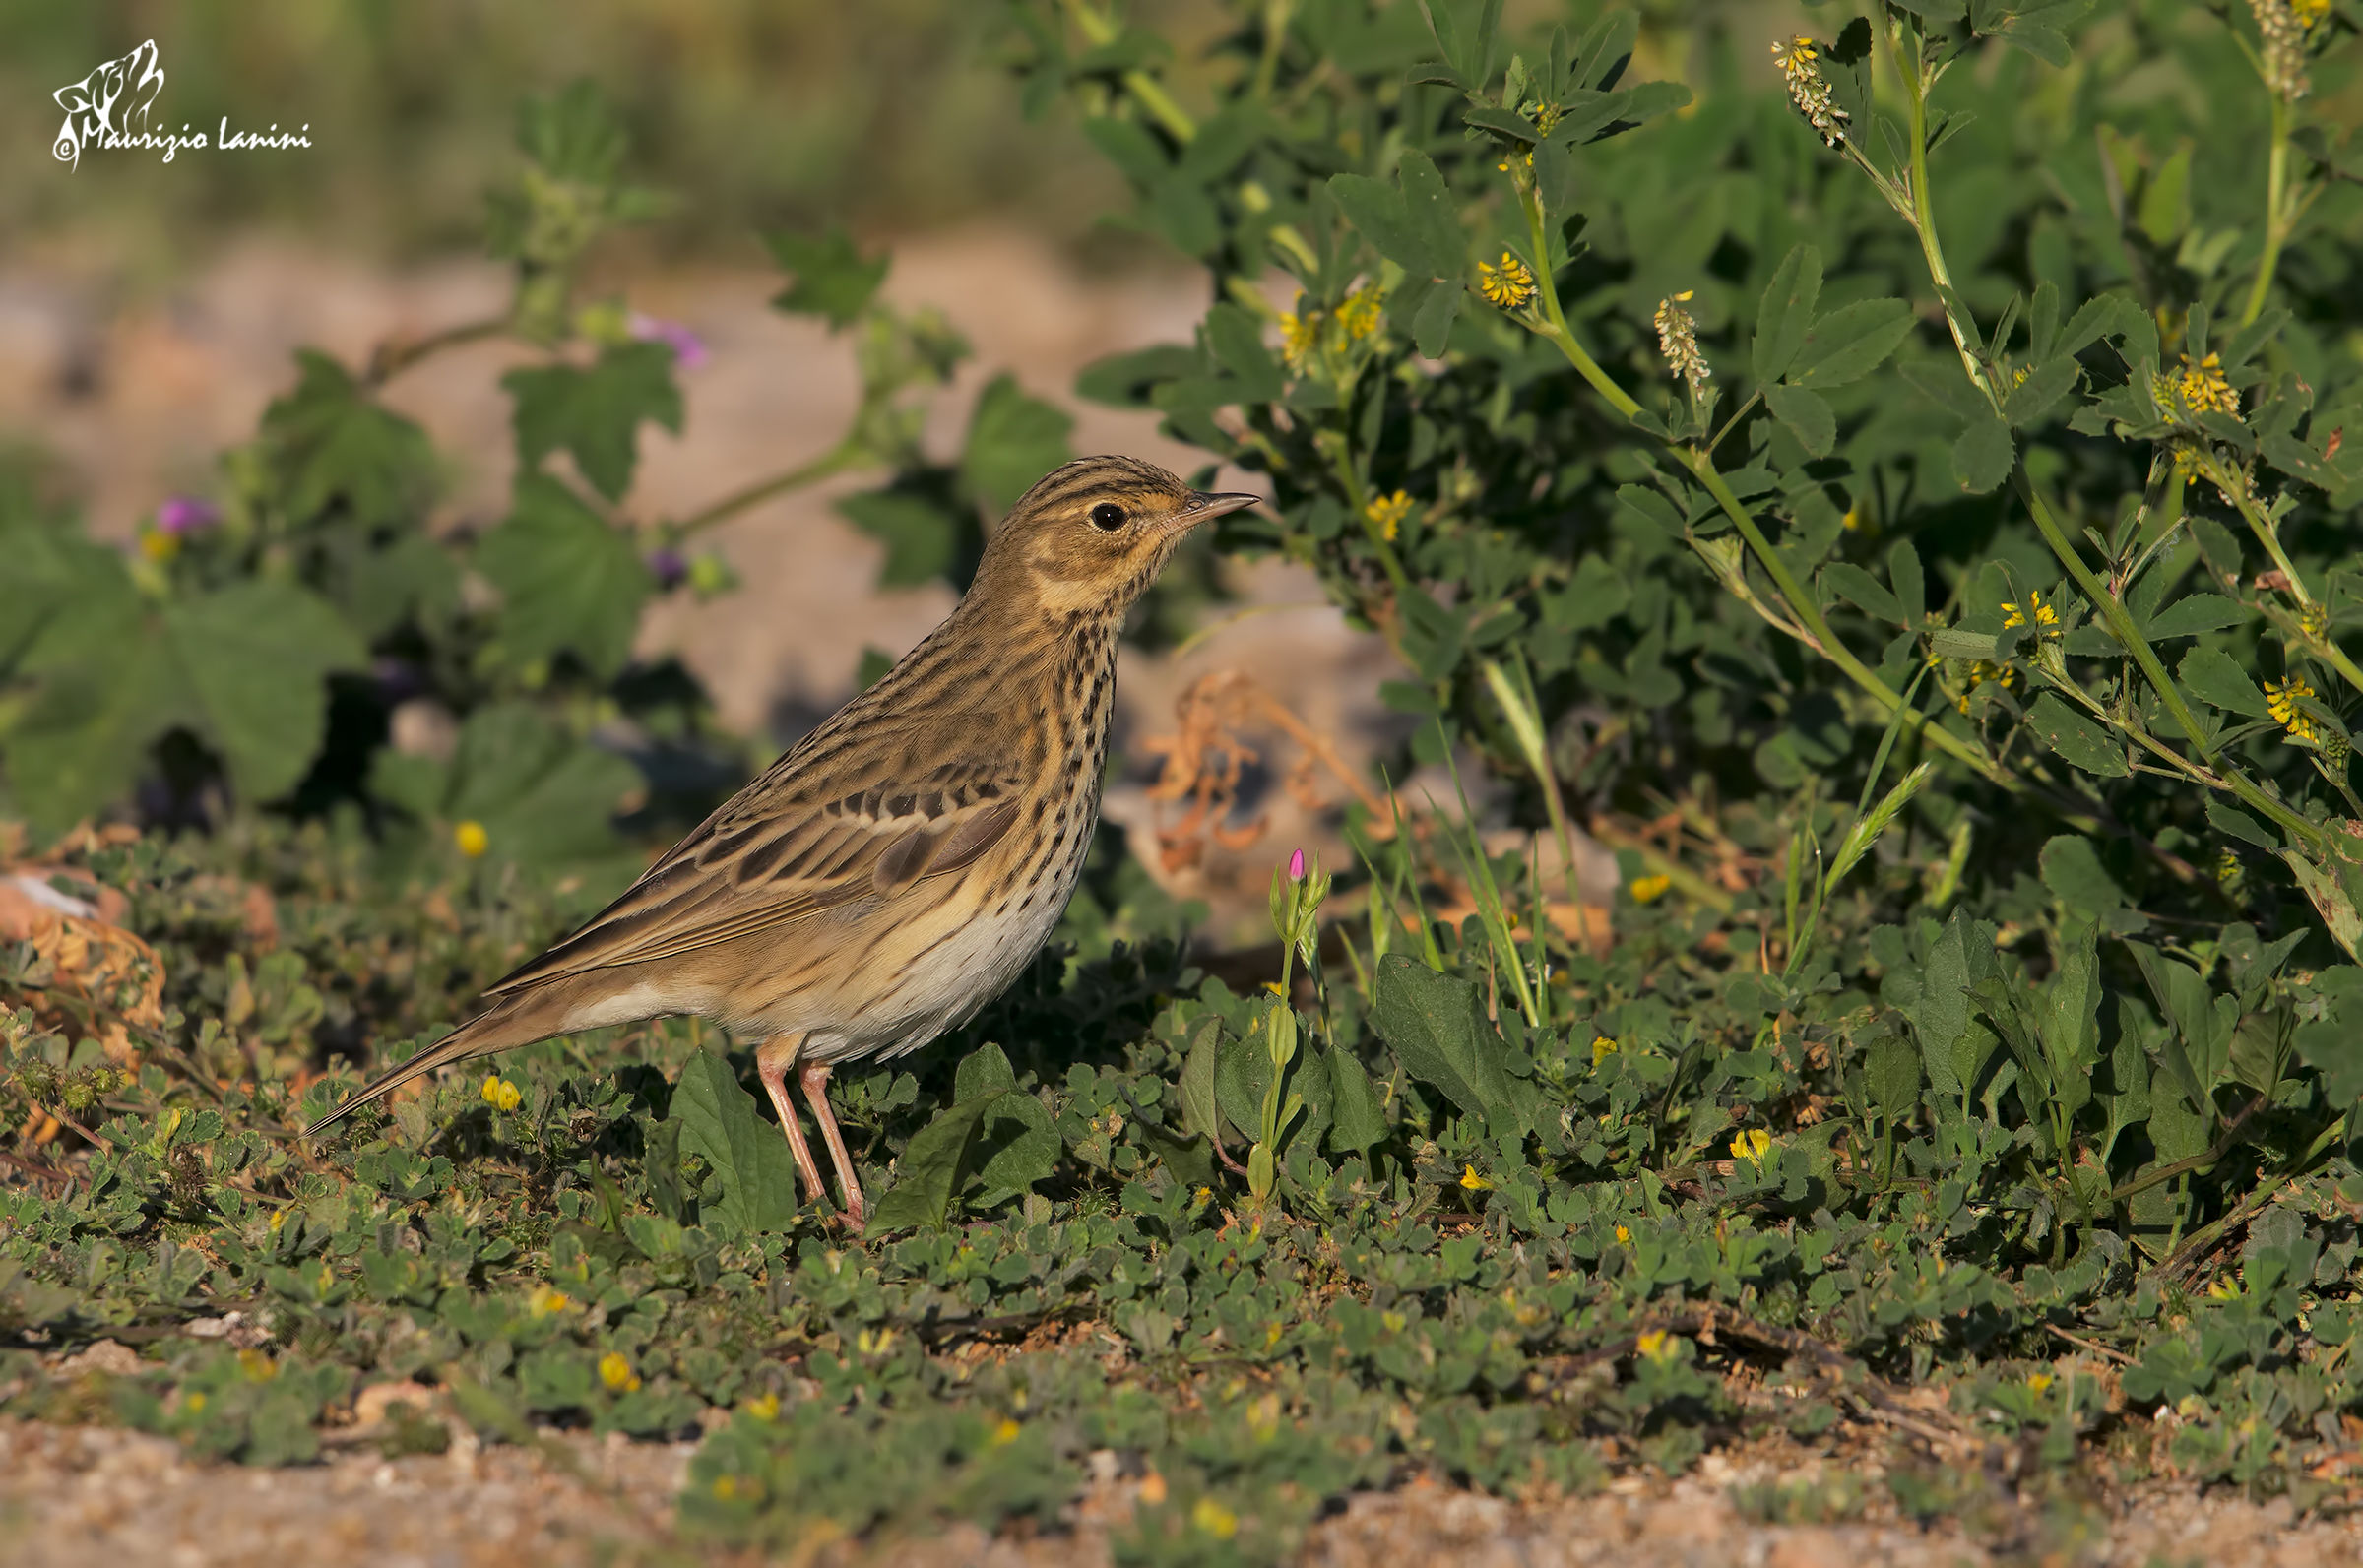 Another rarity: Red-throated Pipit...